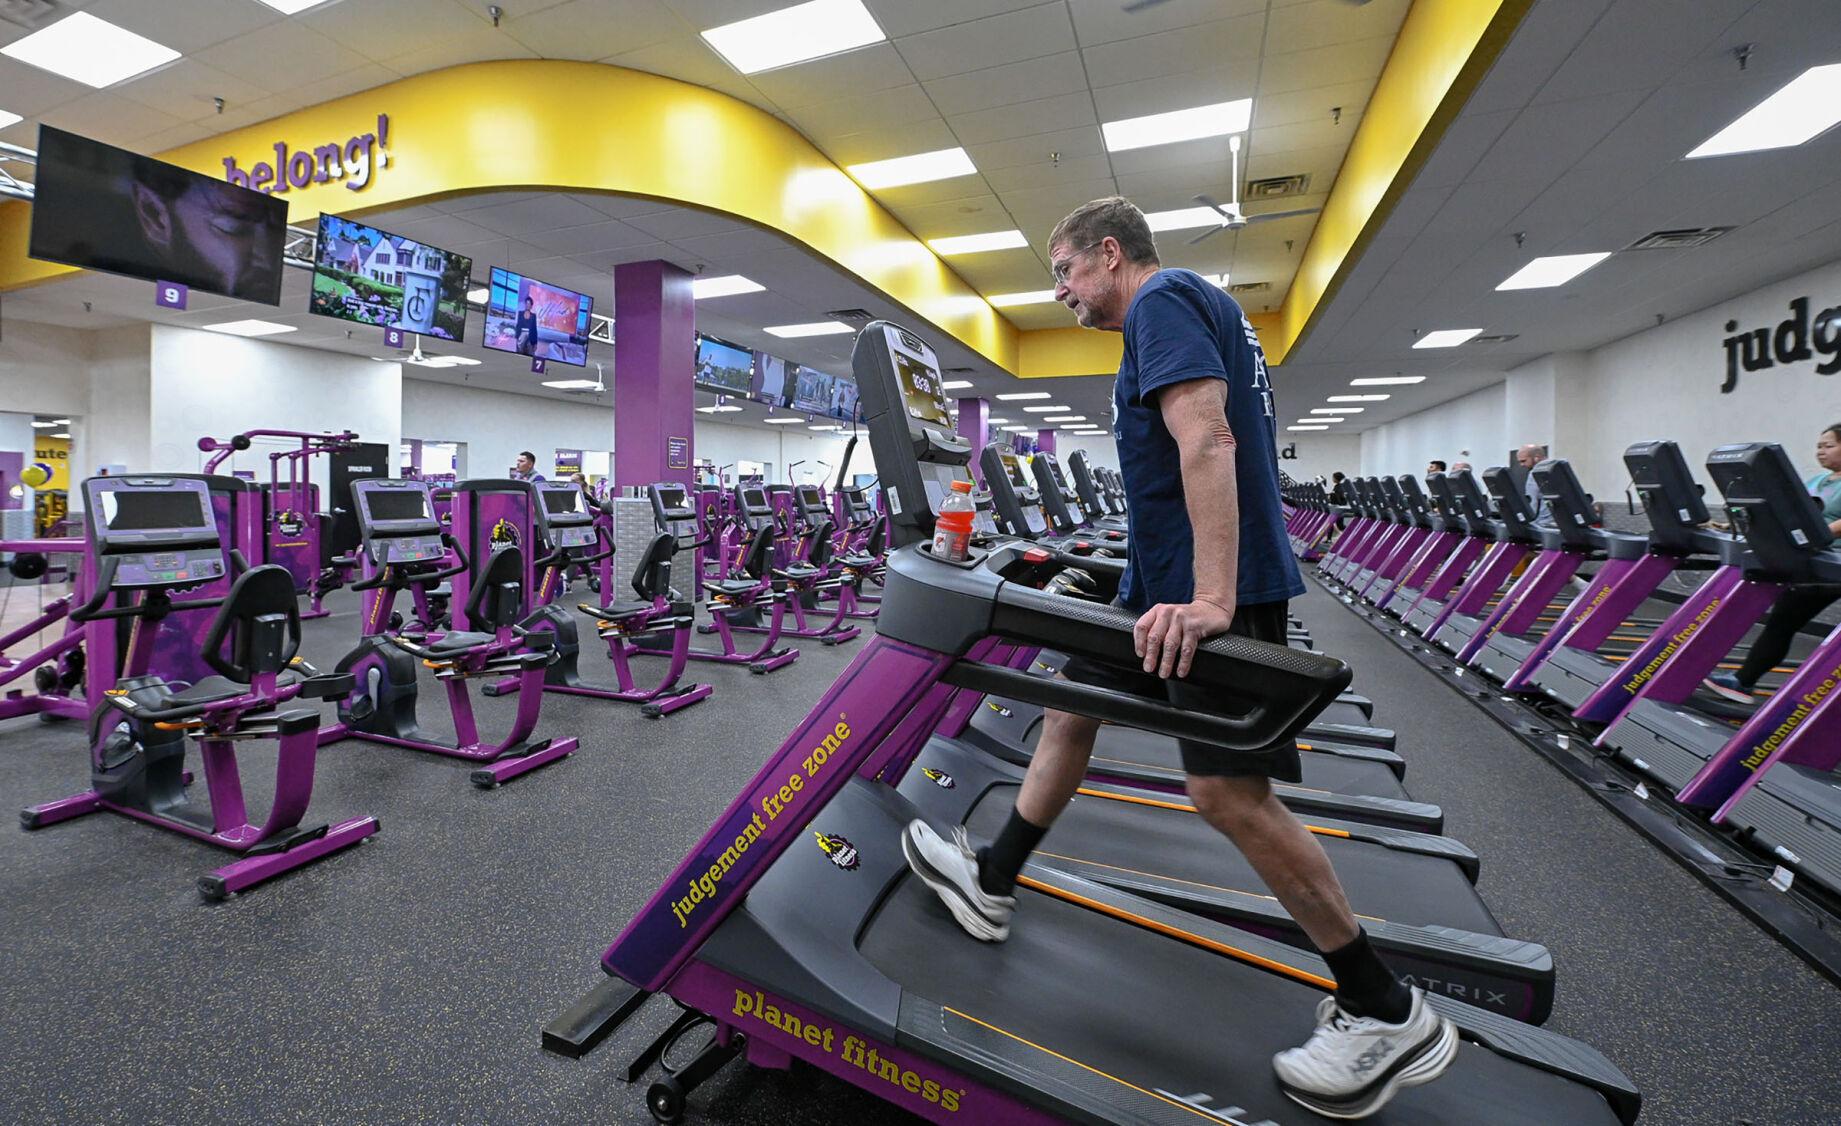 Planet Fitness hosts open house to celebrate renovations